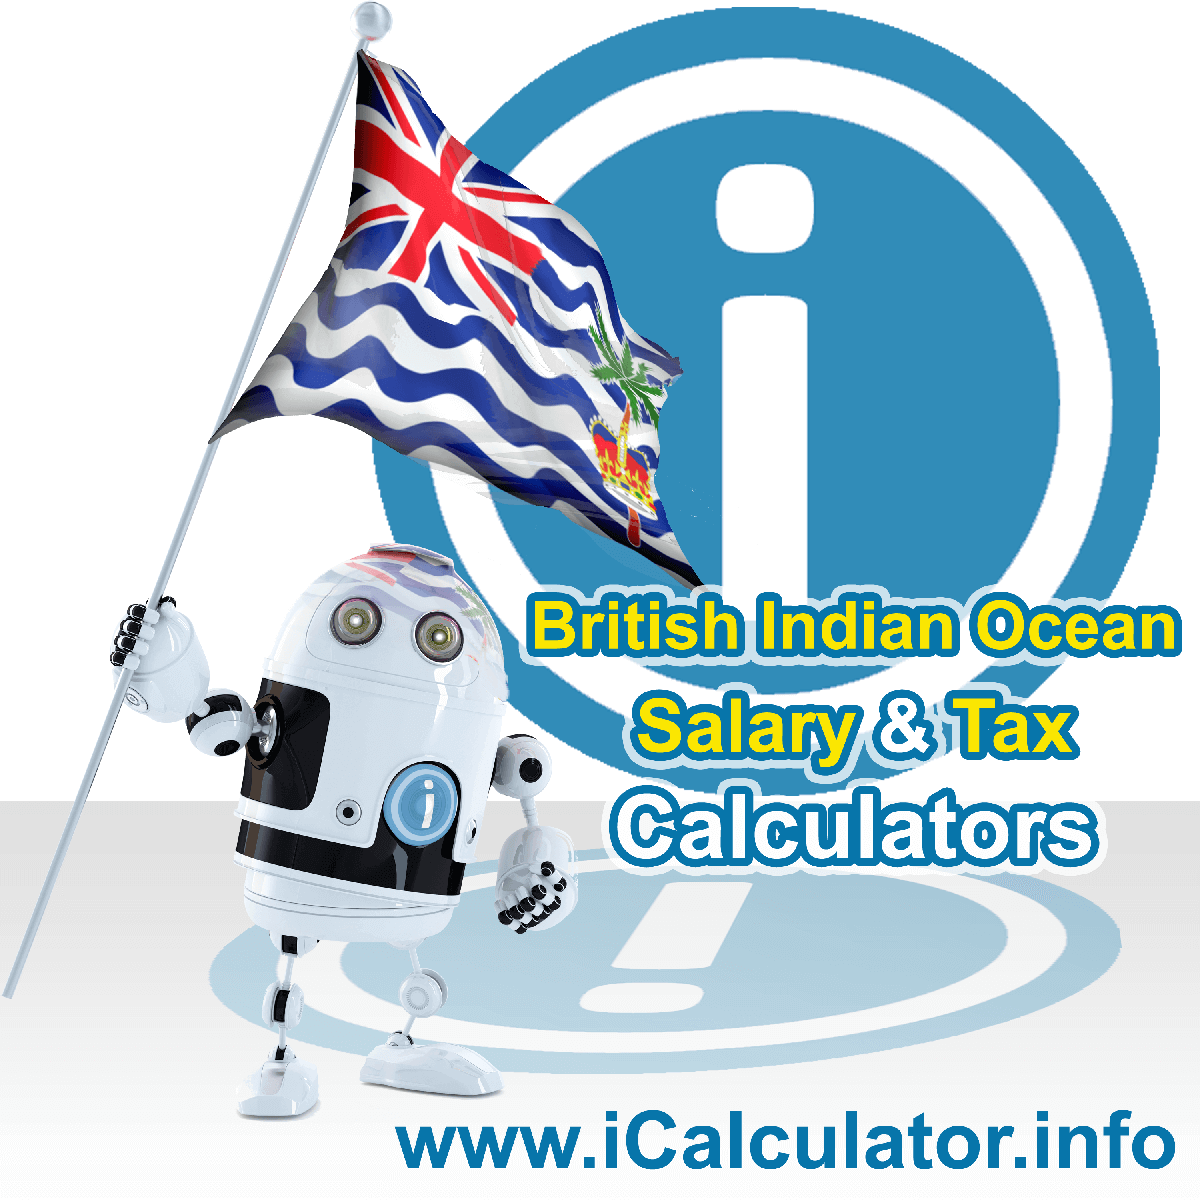 British Indian Ocean Territory Tax Calculator. This image shows the British Indian Ocean Territory flag and information relating to the tax formula for the British Indian Ocean Territory Salary Calculator